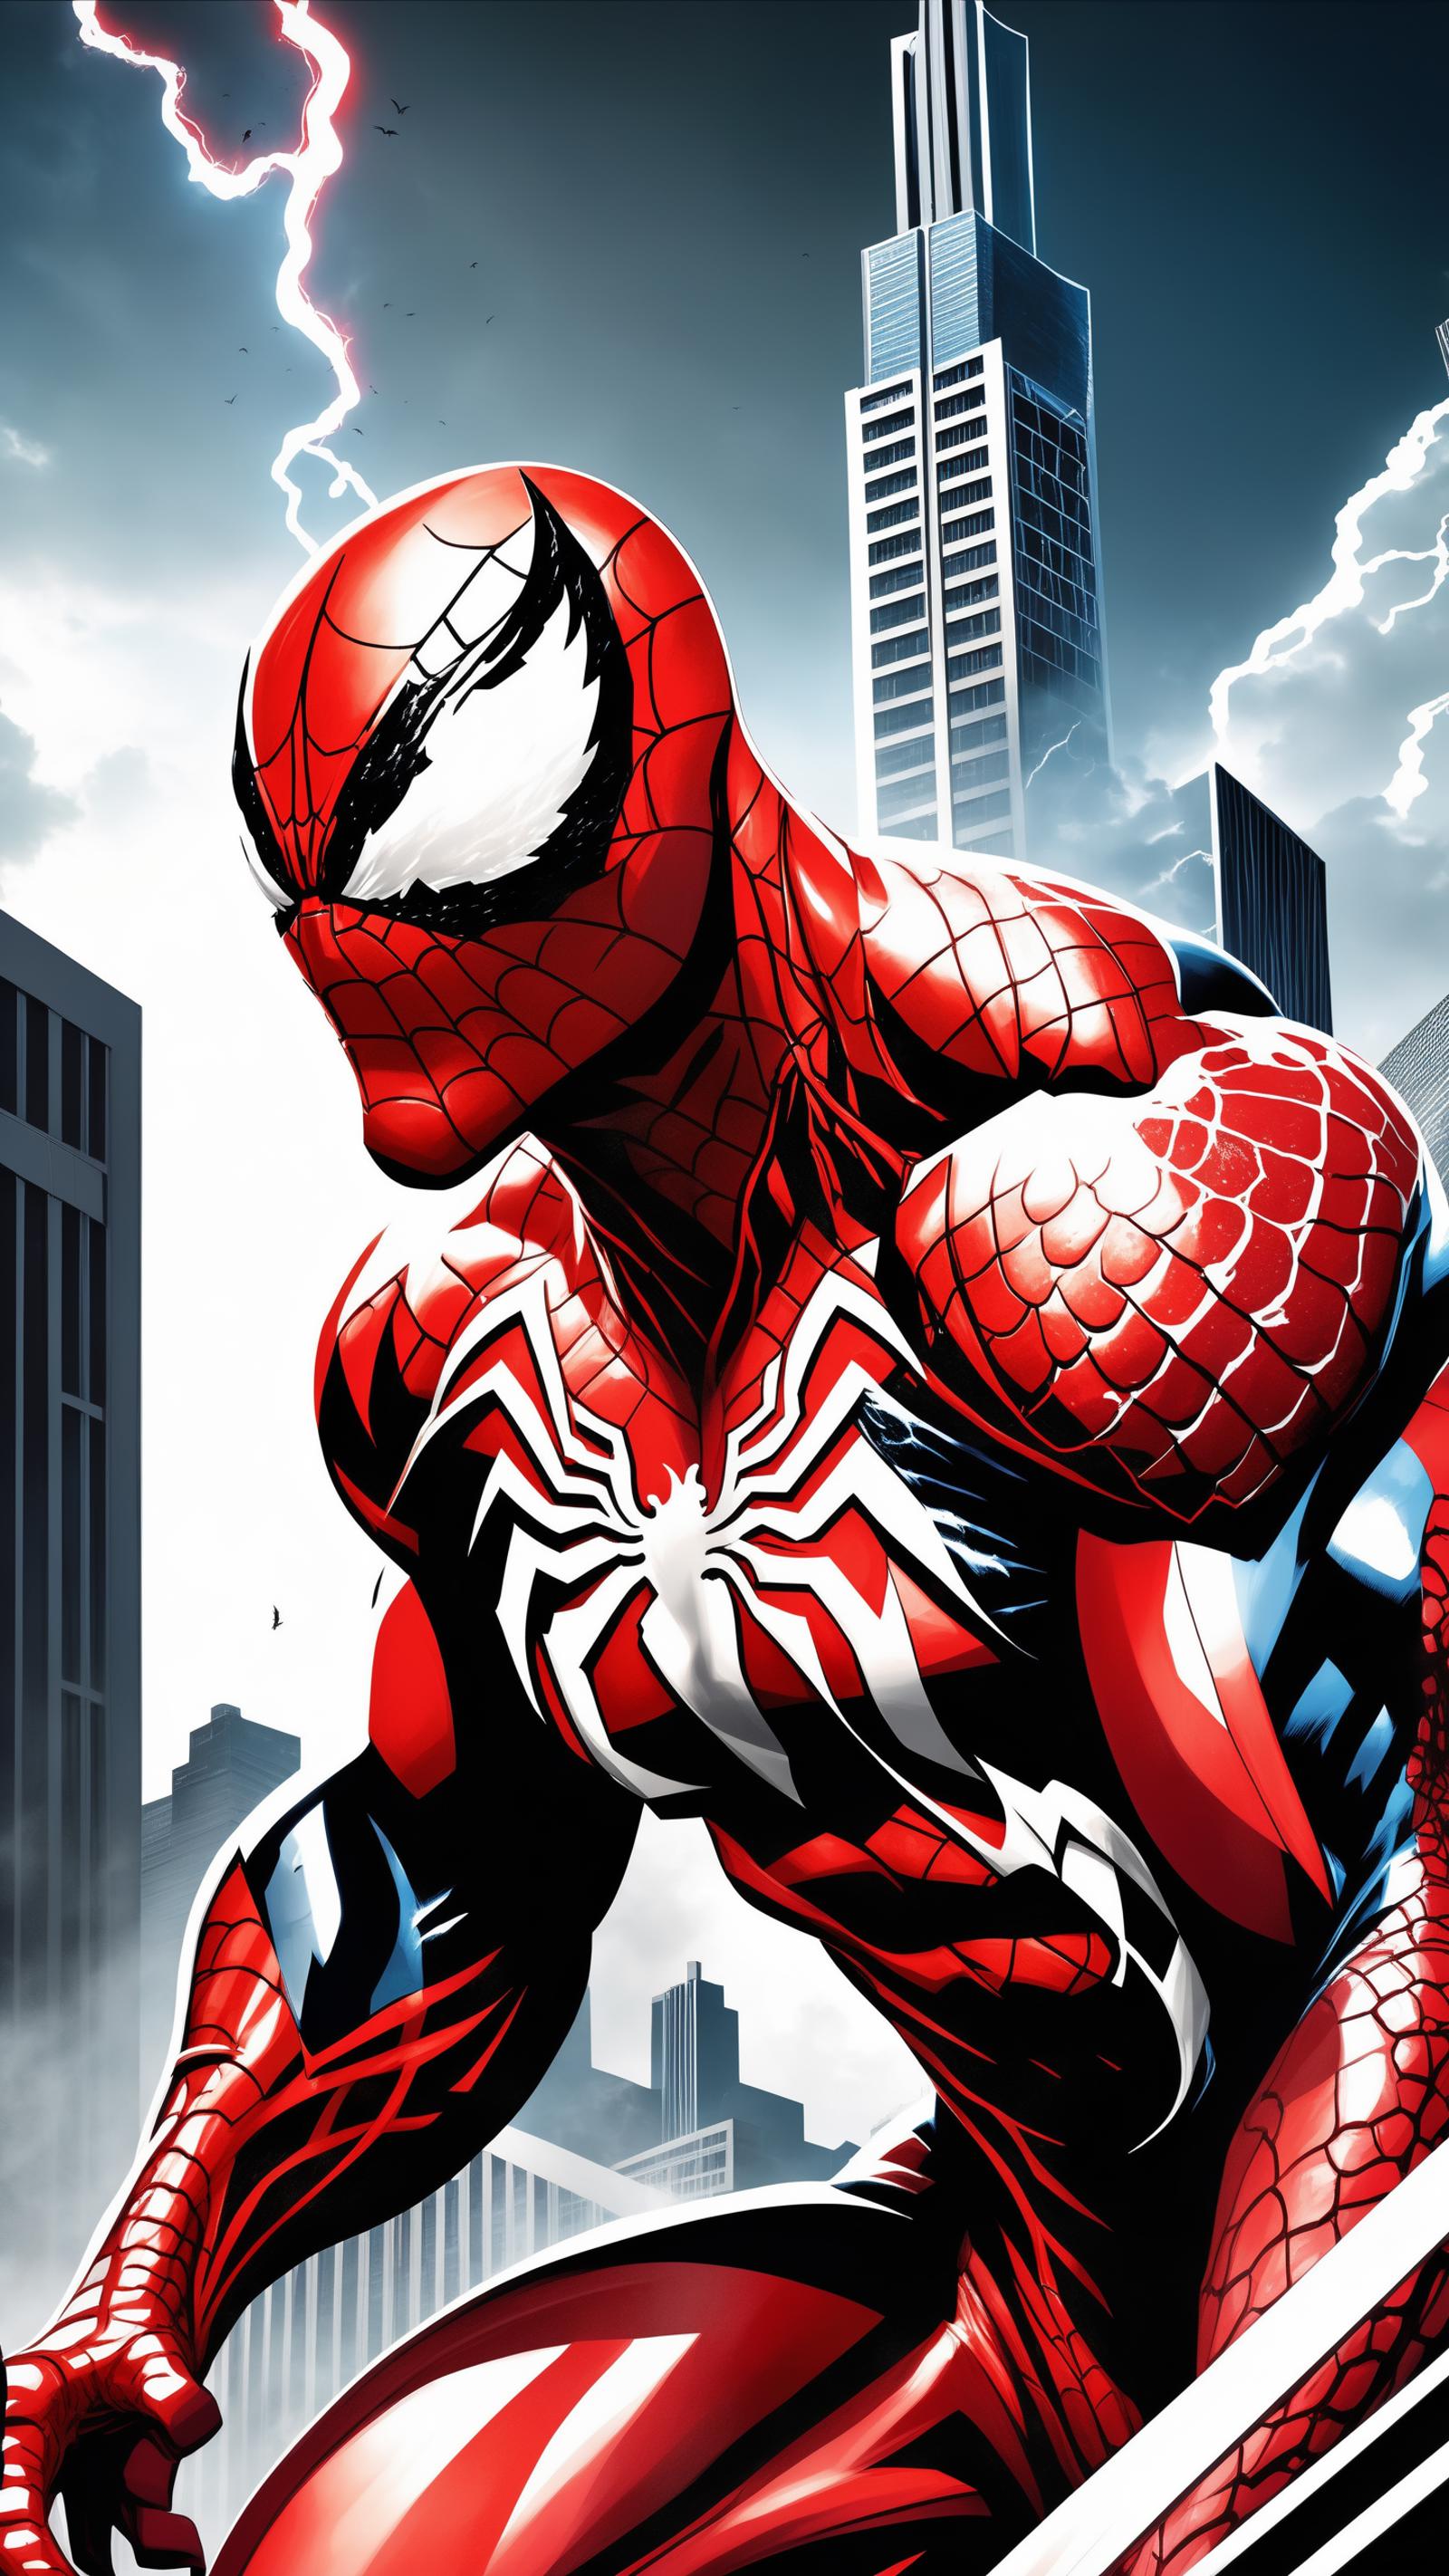 Spider-Man in a Red and Black Costume with Webs on His Chest.